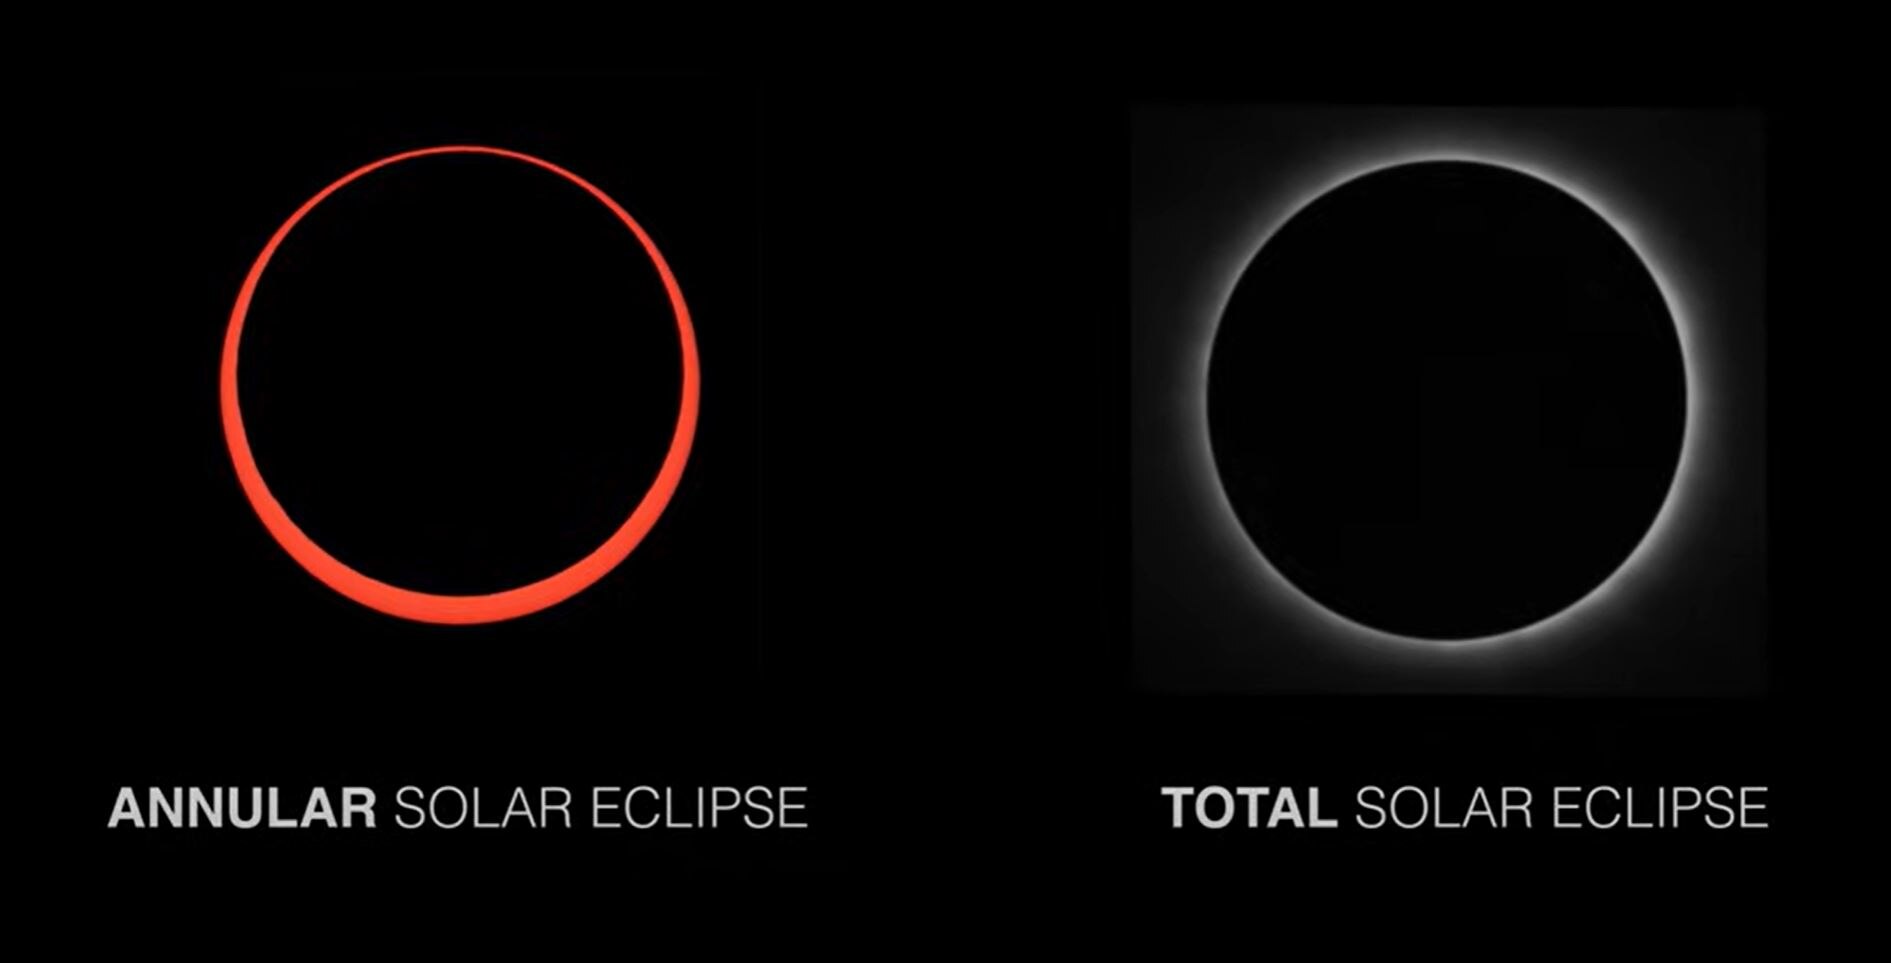 Nasa compares an annular eclipse to the a total solar eclipse